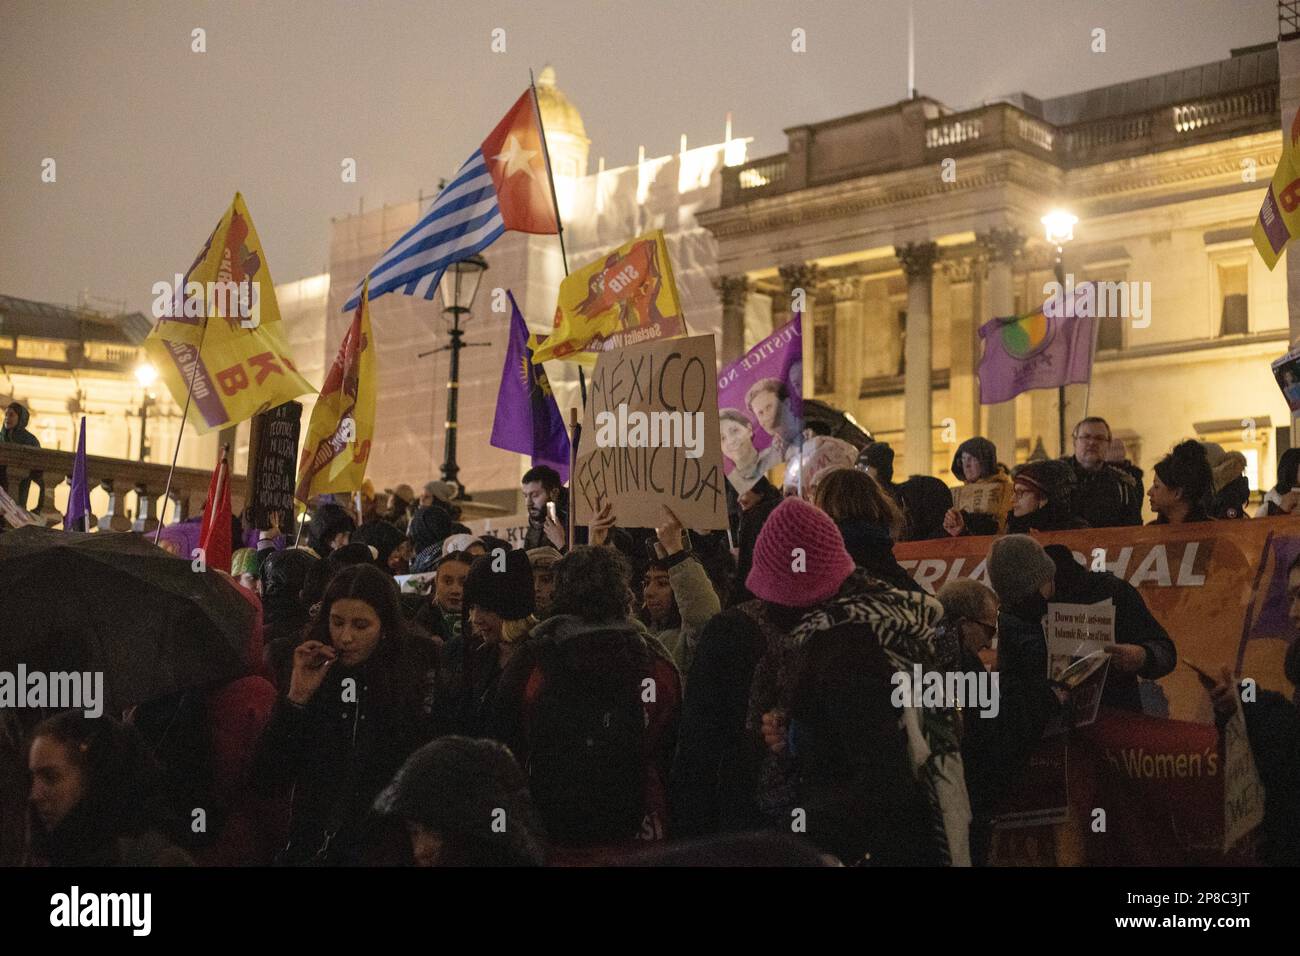 London, UK - 8 March 2023: On a cold and rainy evening, women from various backgrounds, including British, French, Iranian, Turkish, Chinese, Mexican, Afghan, and numerous other nationalities and groups, joined together in Trafalgar Square to mark International Women's Day. Credit: Sinai Noor / Alamy Live News Stock Photo